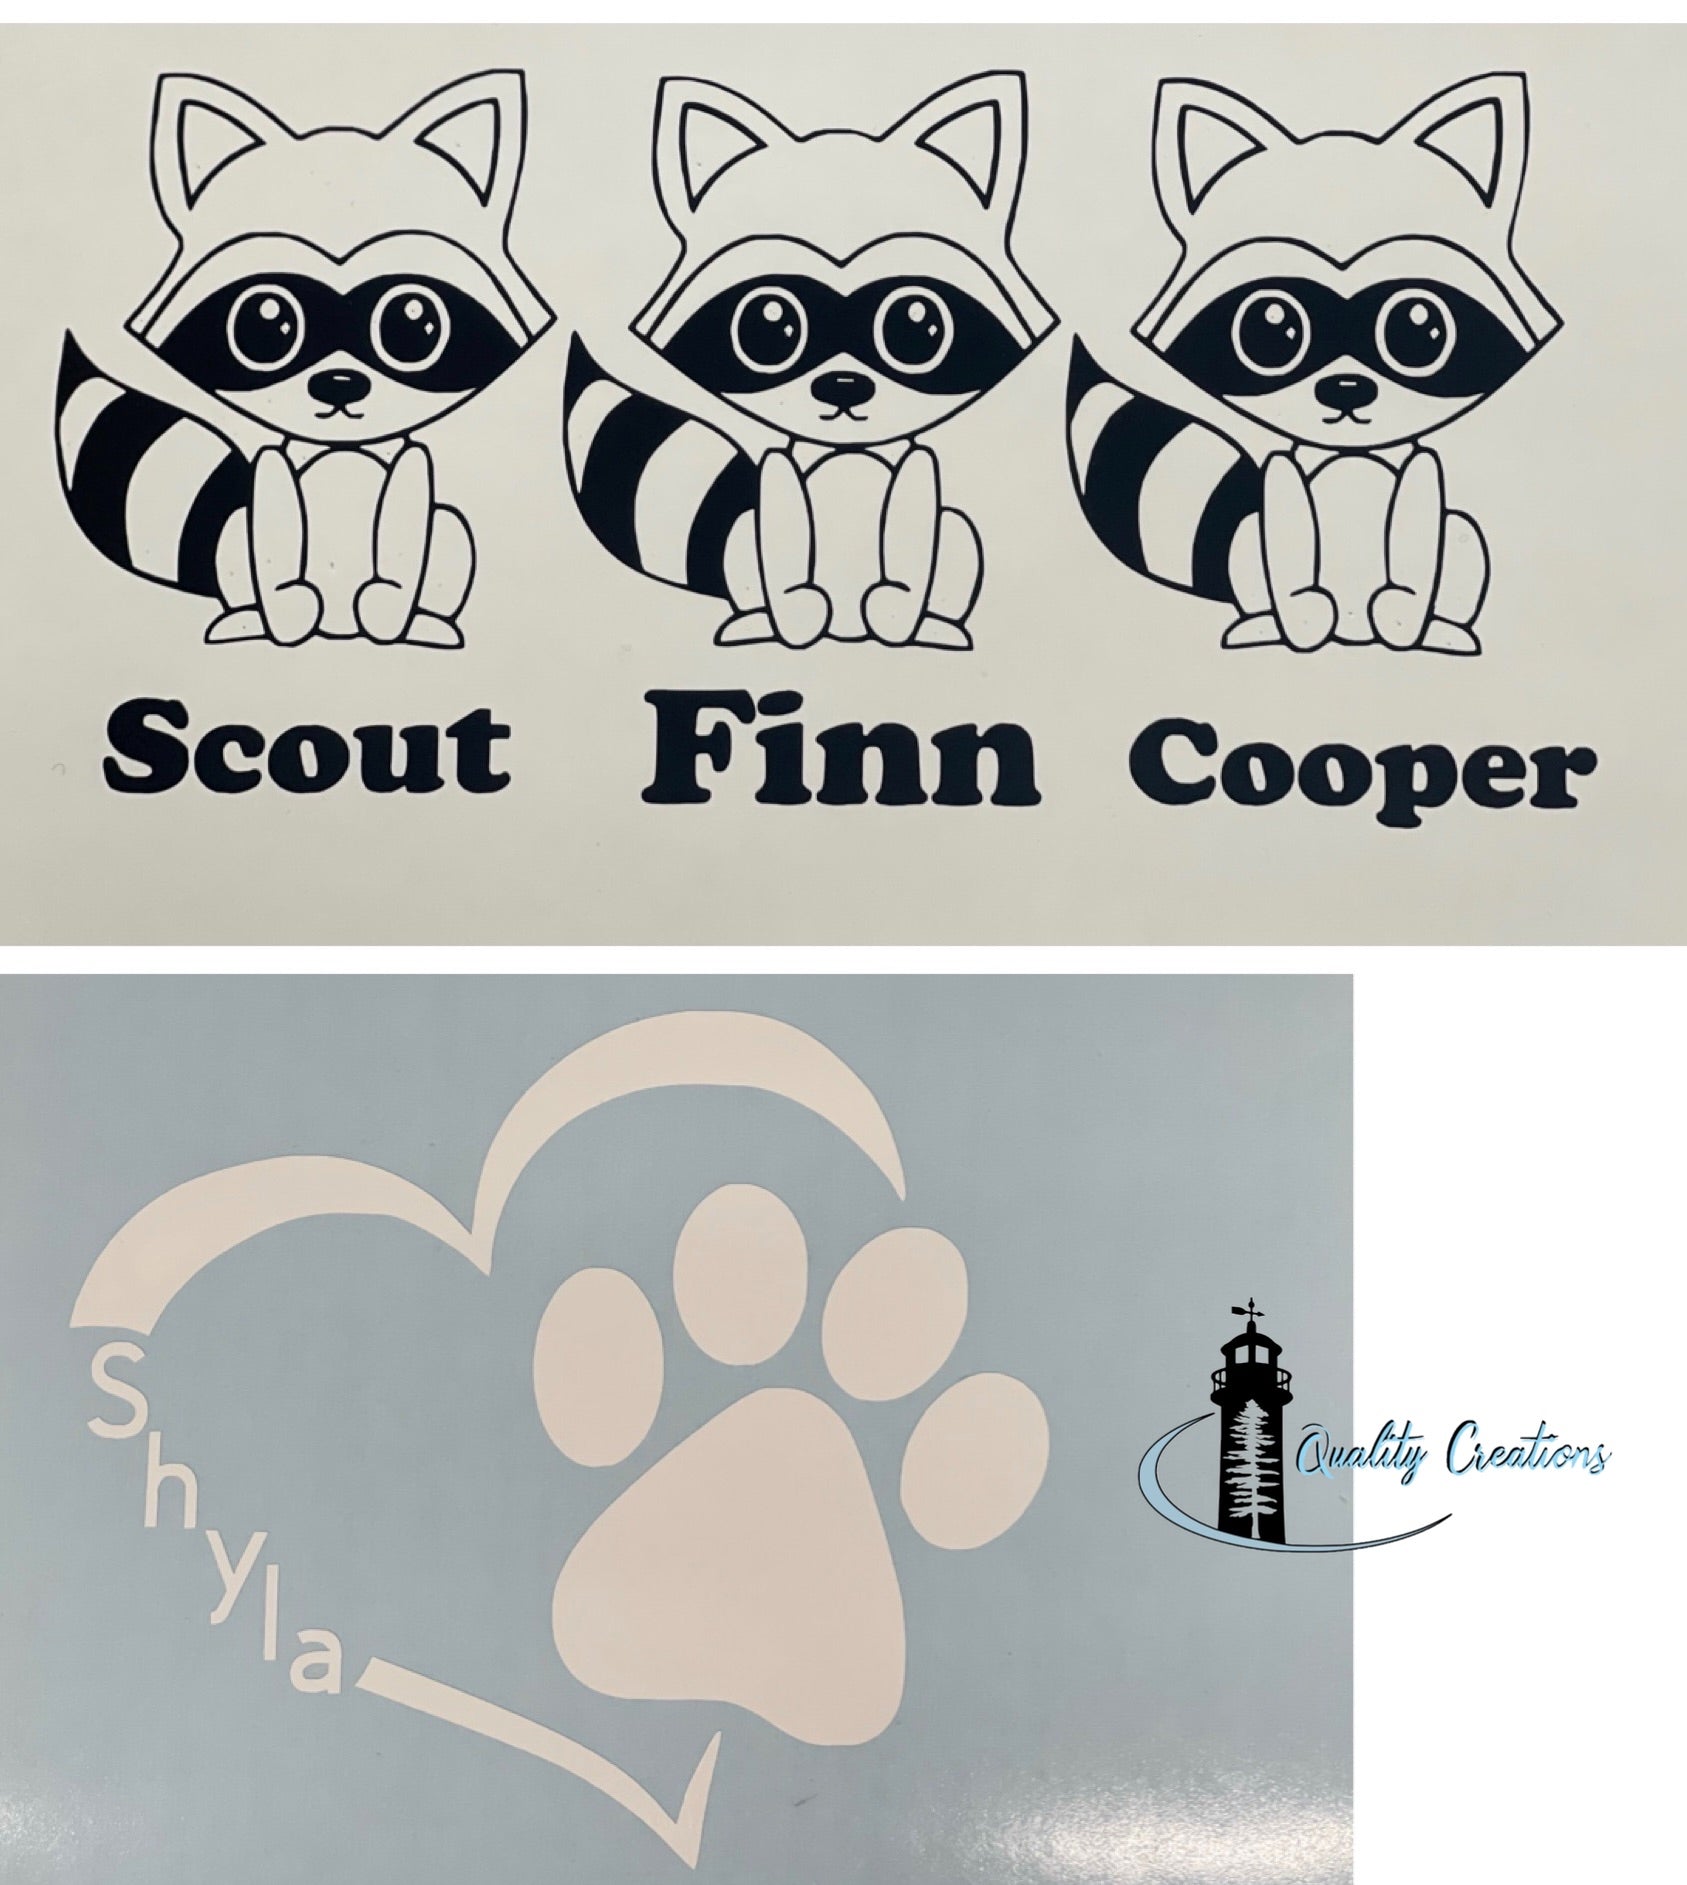 racoons heart paw print decal sticker pink and white font salisbury newbrunswick canada moncton vancouver